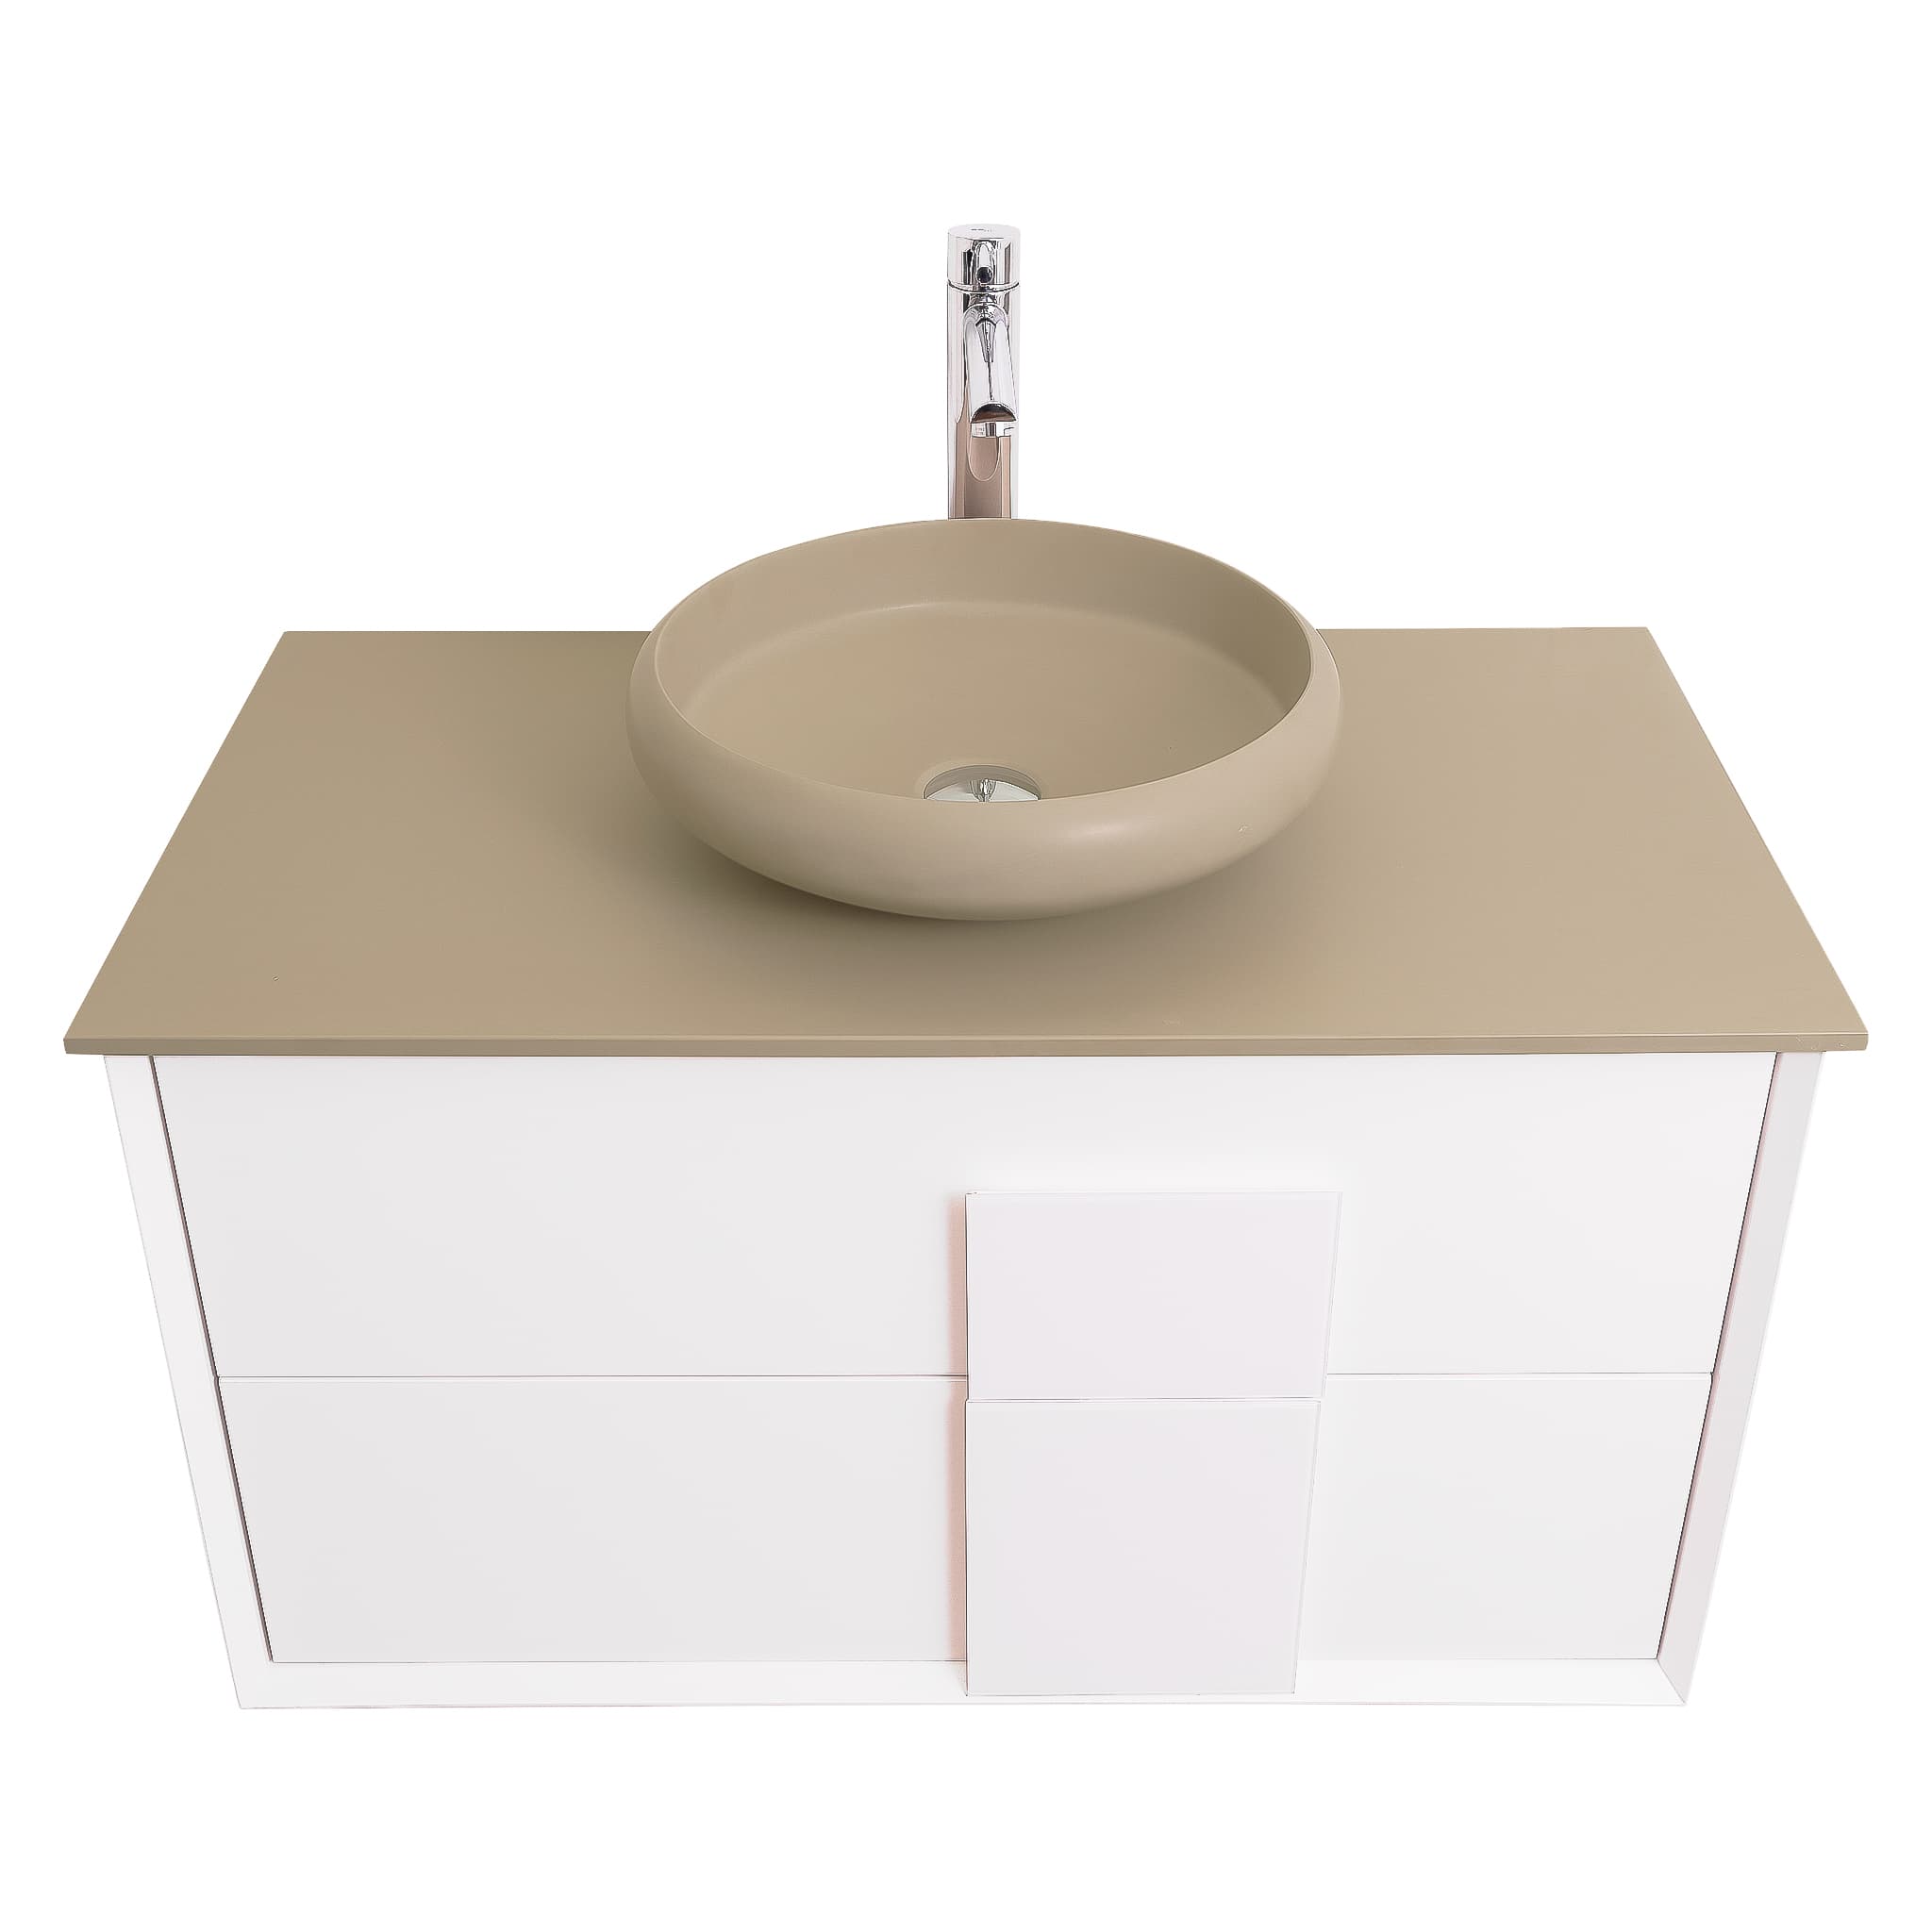 Piazza 31.5 Matte White With White Handle Cabinet, Solid Surface Flat Taupe Counter and Round Solid Surface Taupe Basin 1153, Wall Mounted Modern Vanity Set